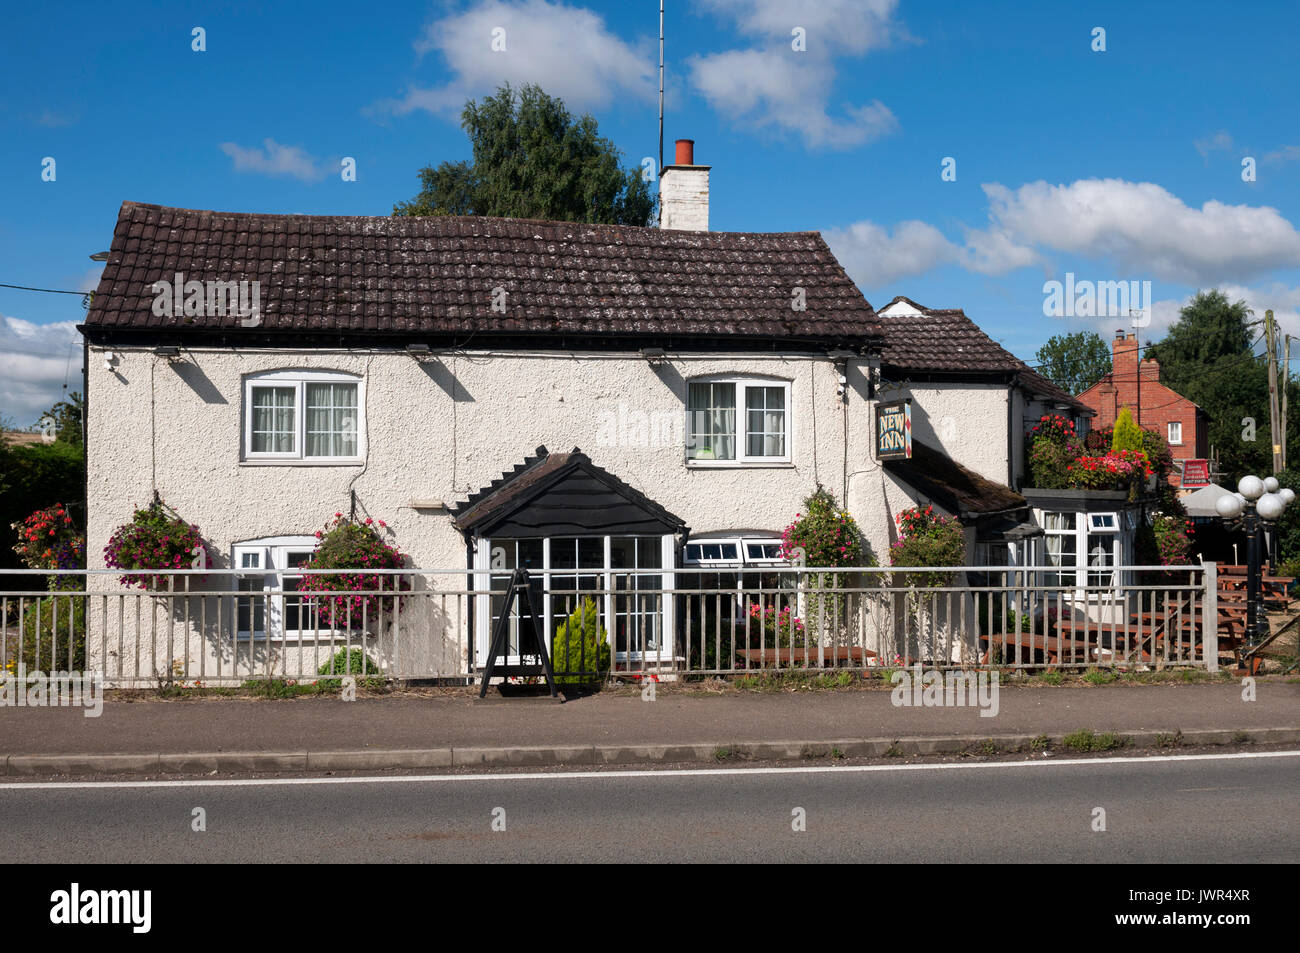 The New Inn on the A5 road, Long Buckby Wharf, Northamptonshire, England, UK Stock Photo